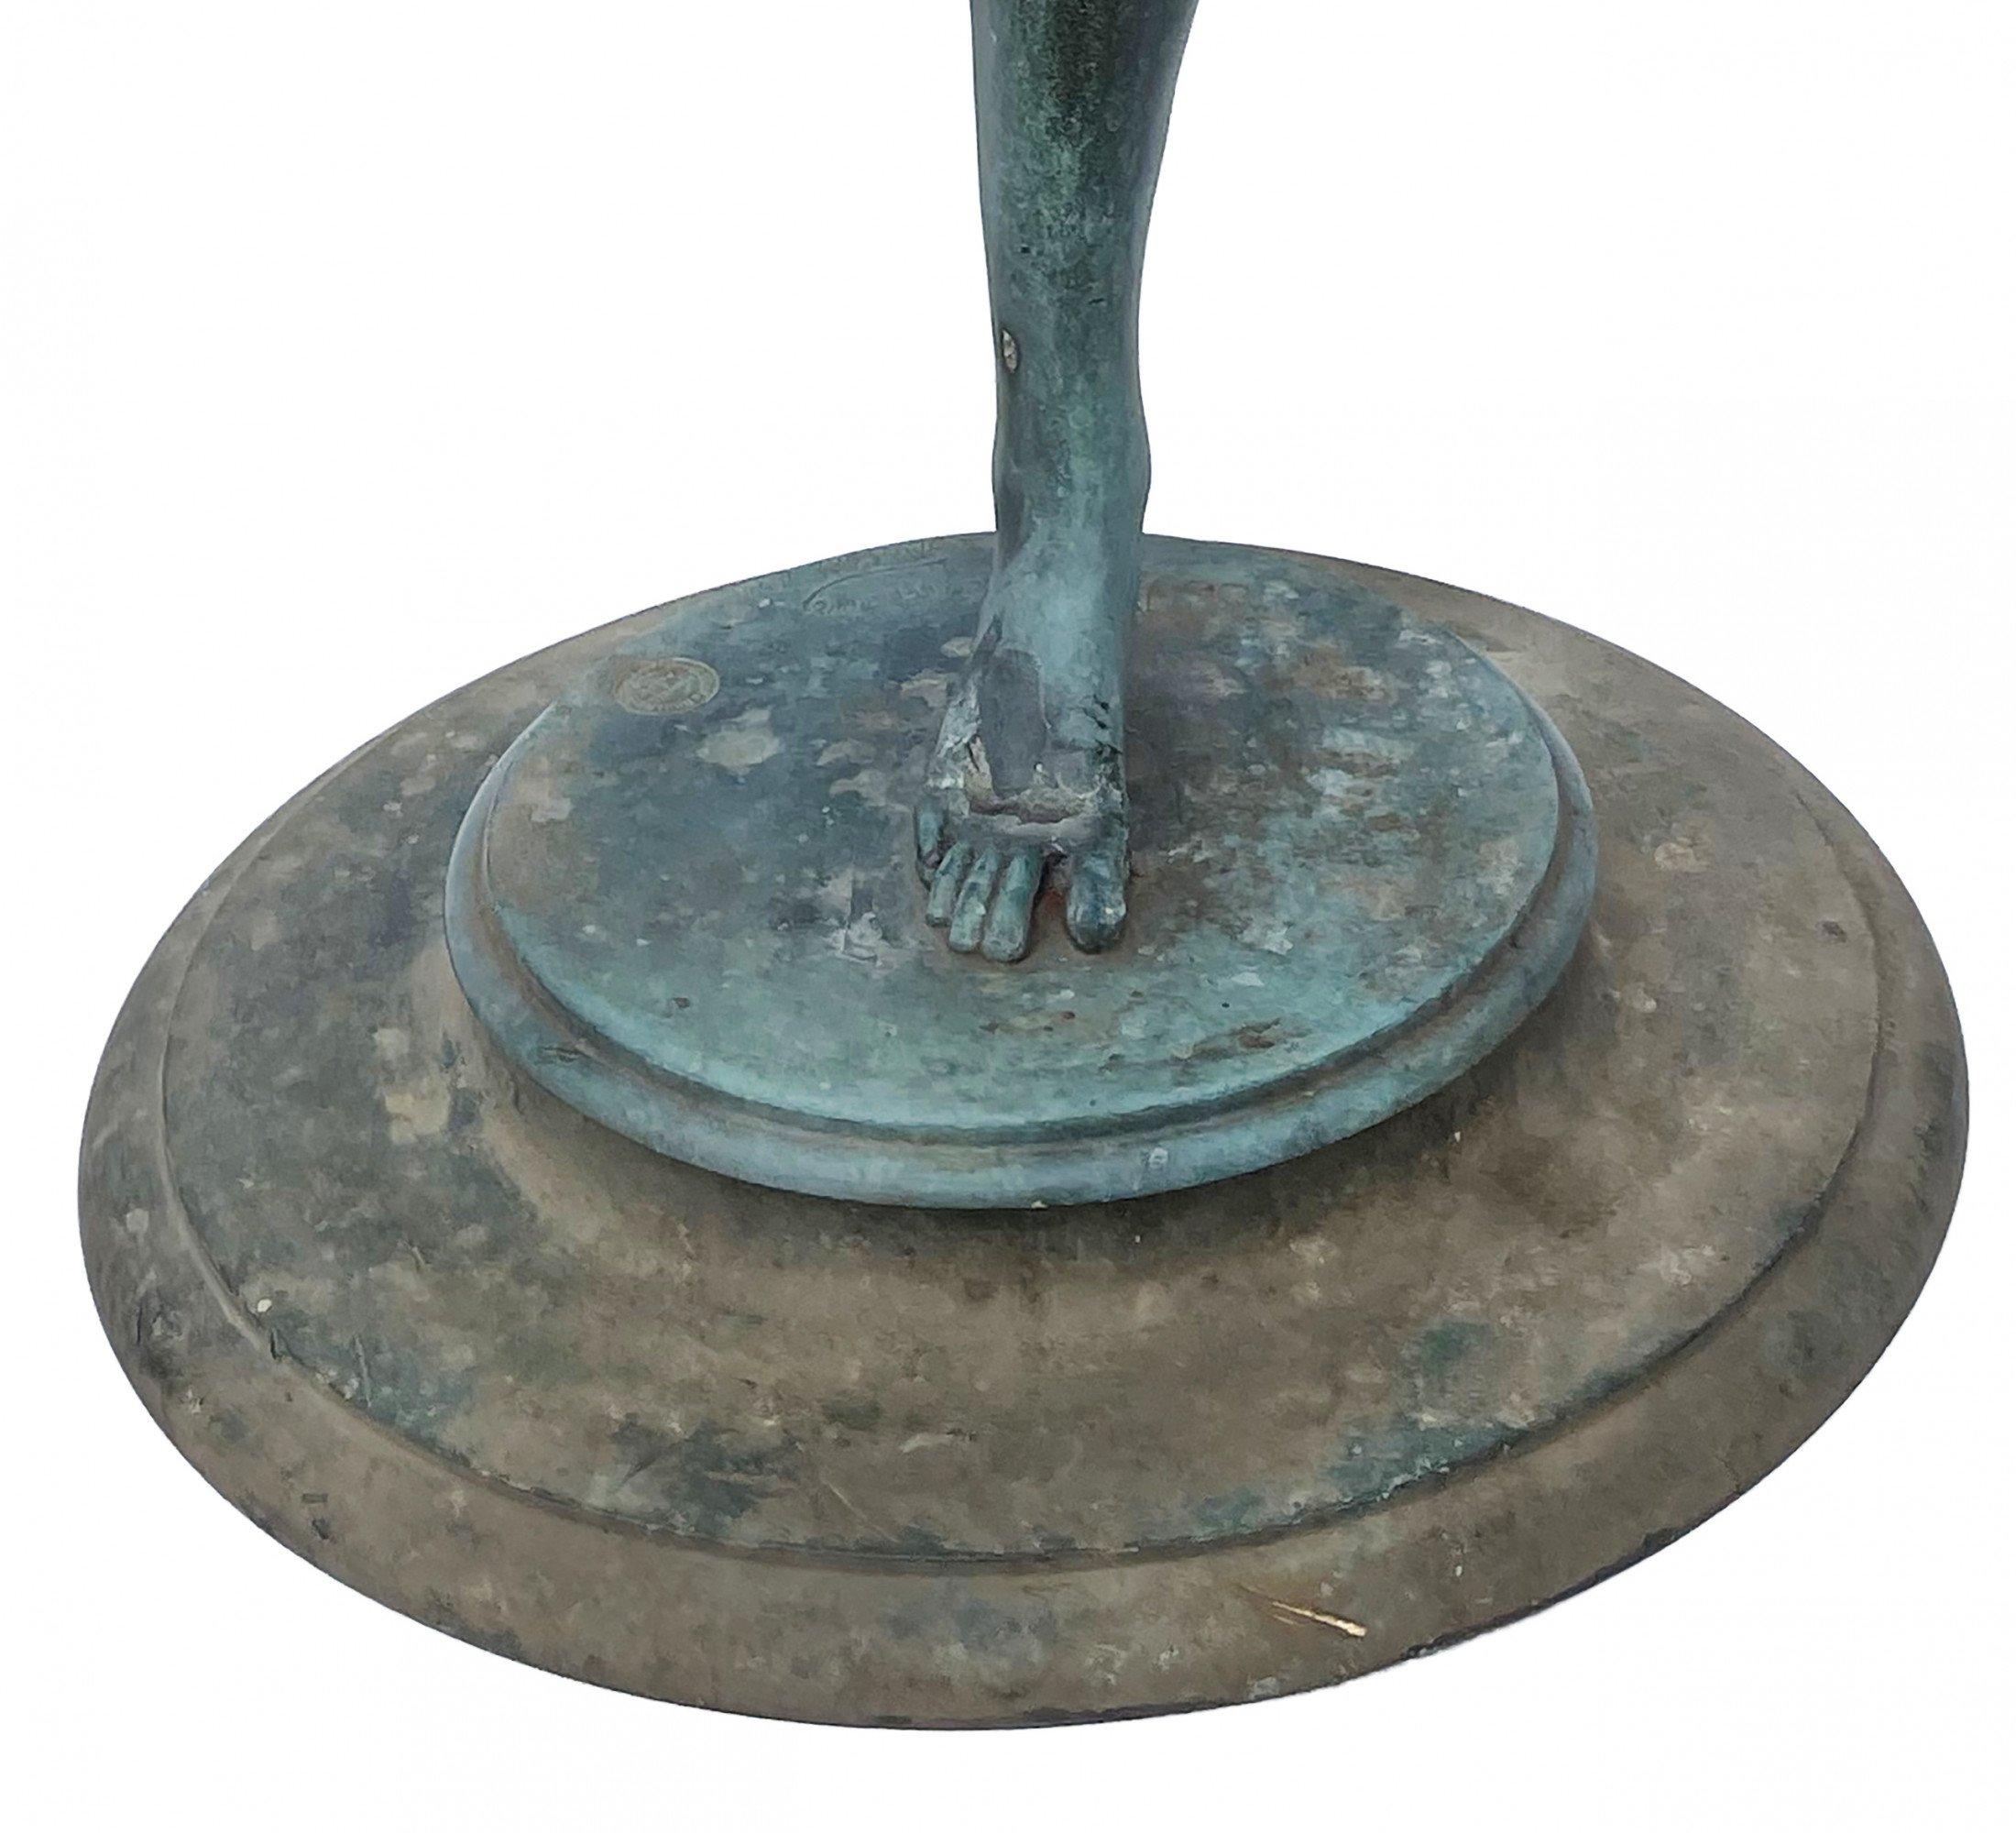 Frederick William MacMonnies (American, 1863-1937)
Diana, 1890
Bronze with green verdigris patina 
Signed and dated 
Copyright 1894 with Jaboeuf & Rouard, Paris foundry mark
31 x 21 x 17 inches 

A sculptor of classical figures, American-born